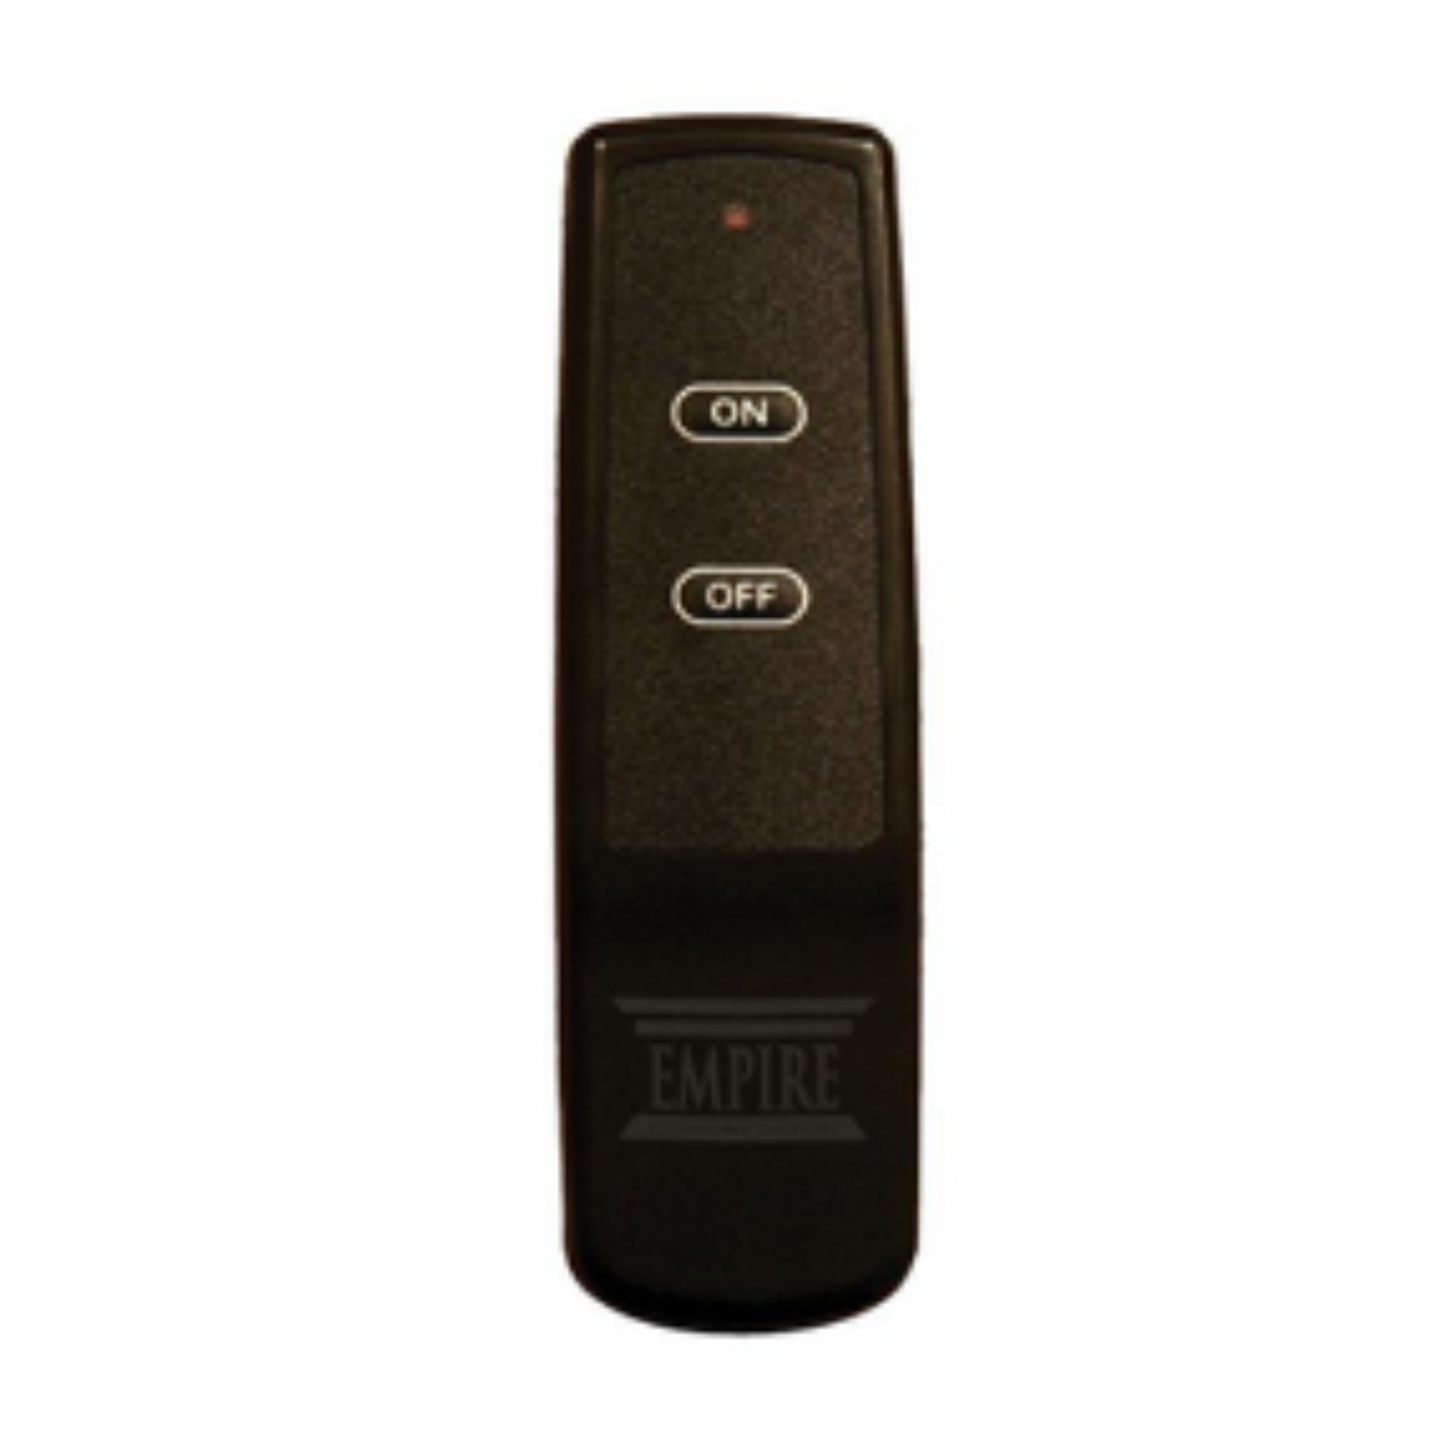 Empire On/Off Remote control with battery remote and receiver - FRBC